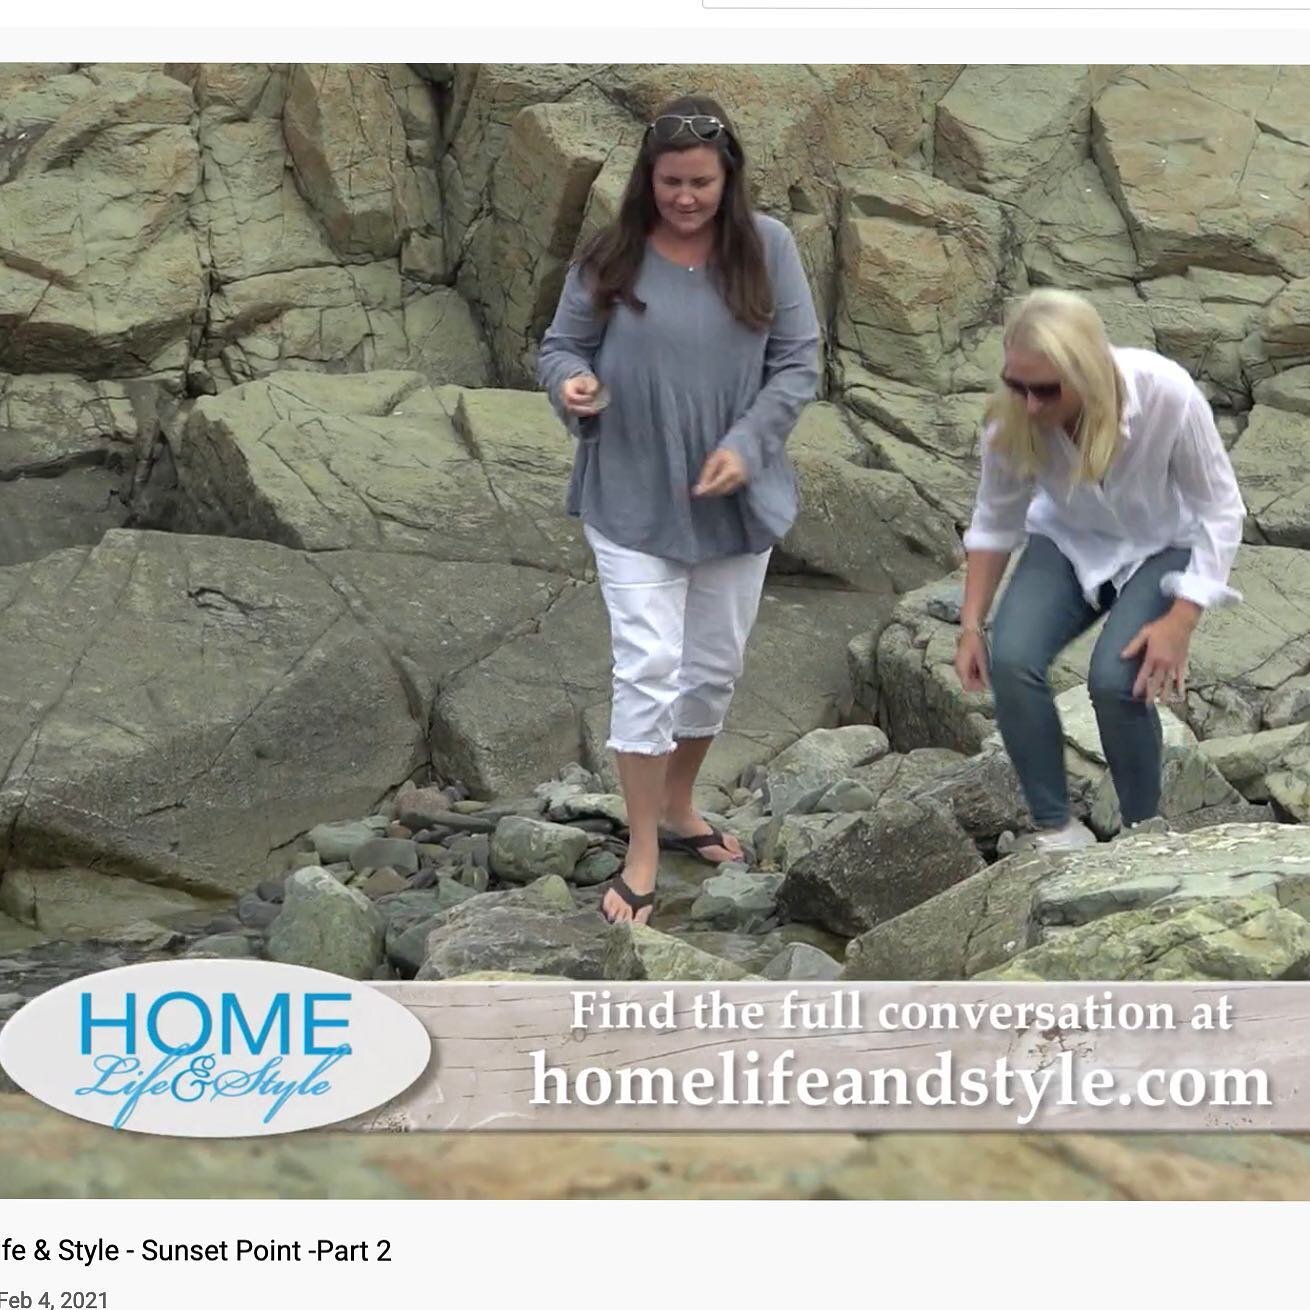 Shelling and a chat with Parker Kelley of Home Life &amp; Styles!⁠⠀
⁠⠀
I was so busy painting last week I forgot to let Boston area folks know Home Life &amp; Styles Sunset Point Episode Part 2 aired last Sundayand ABC tv. Now the episode is on you t